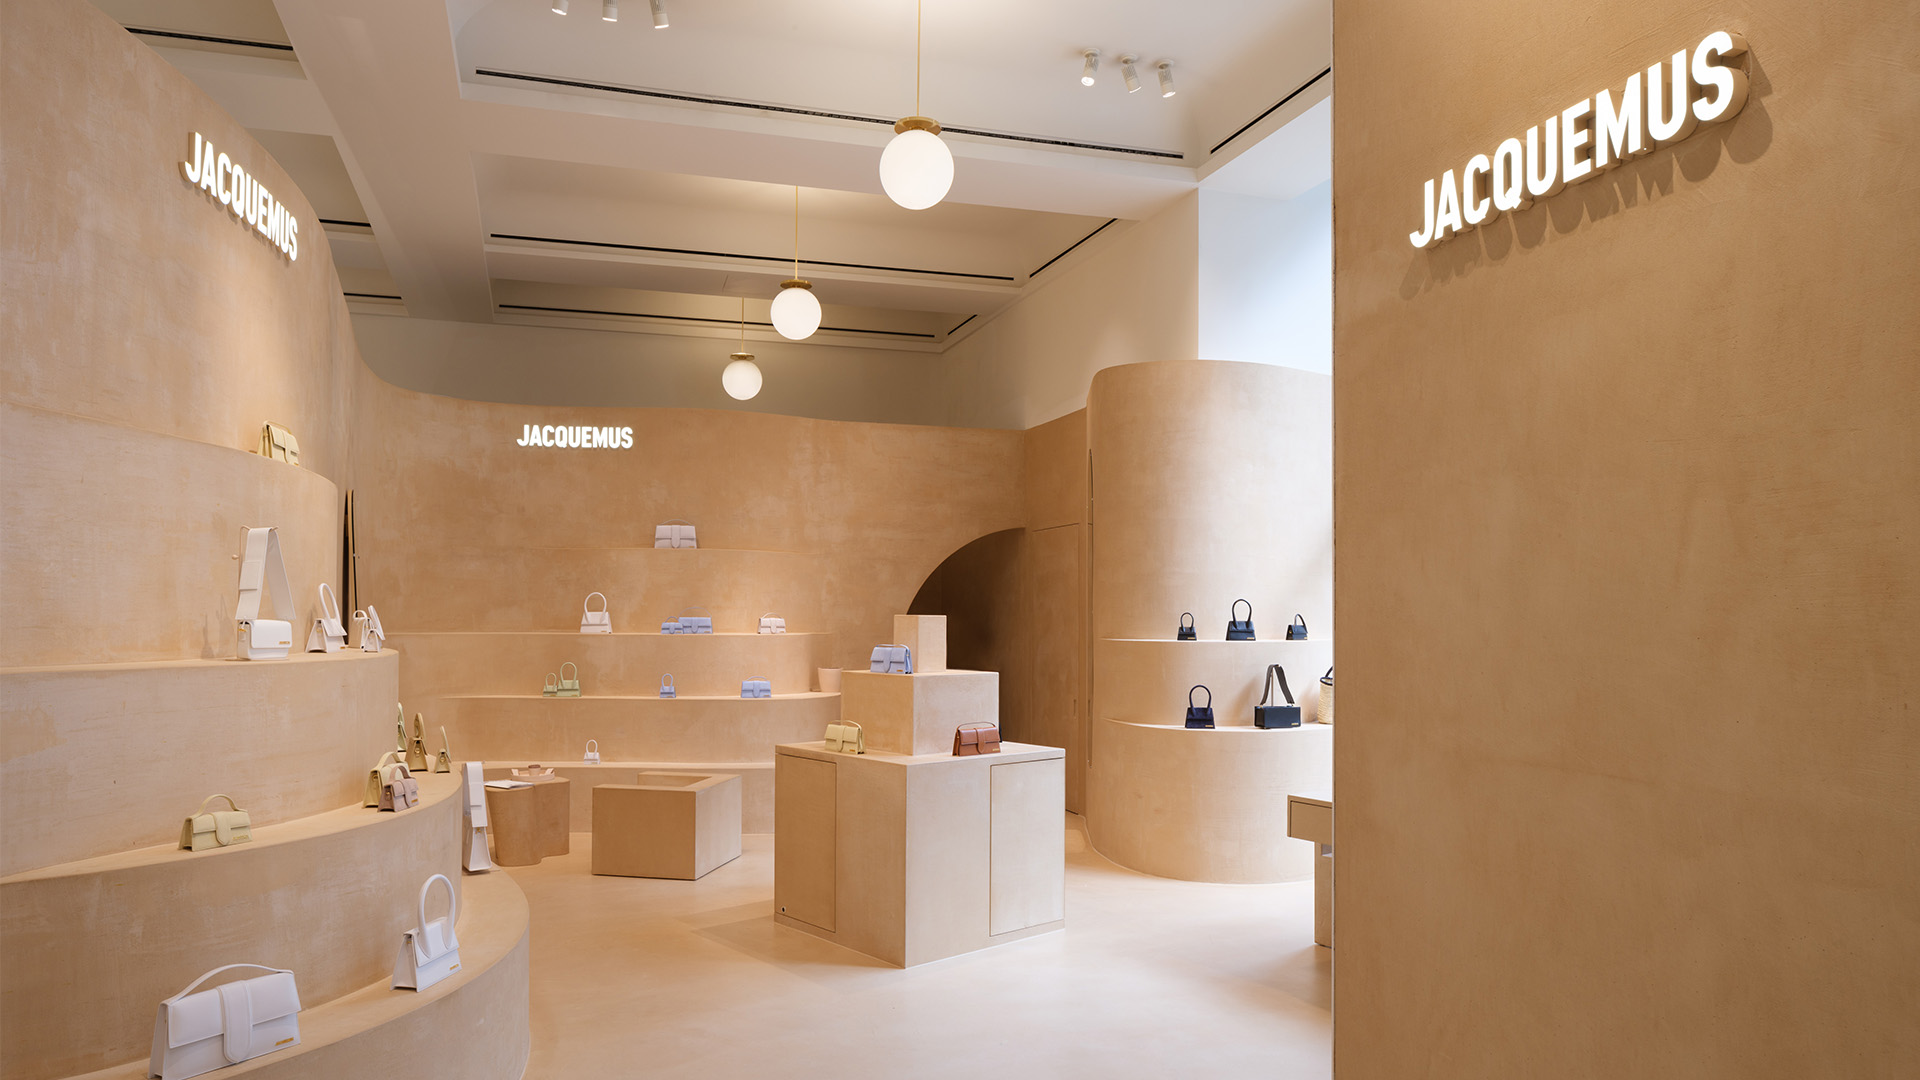 Jacquemus opens accessories boutique in Selfridges - TheIndustry.fashion